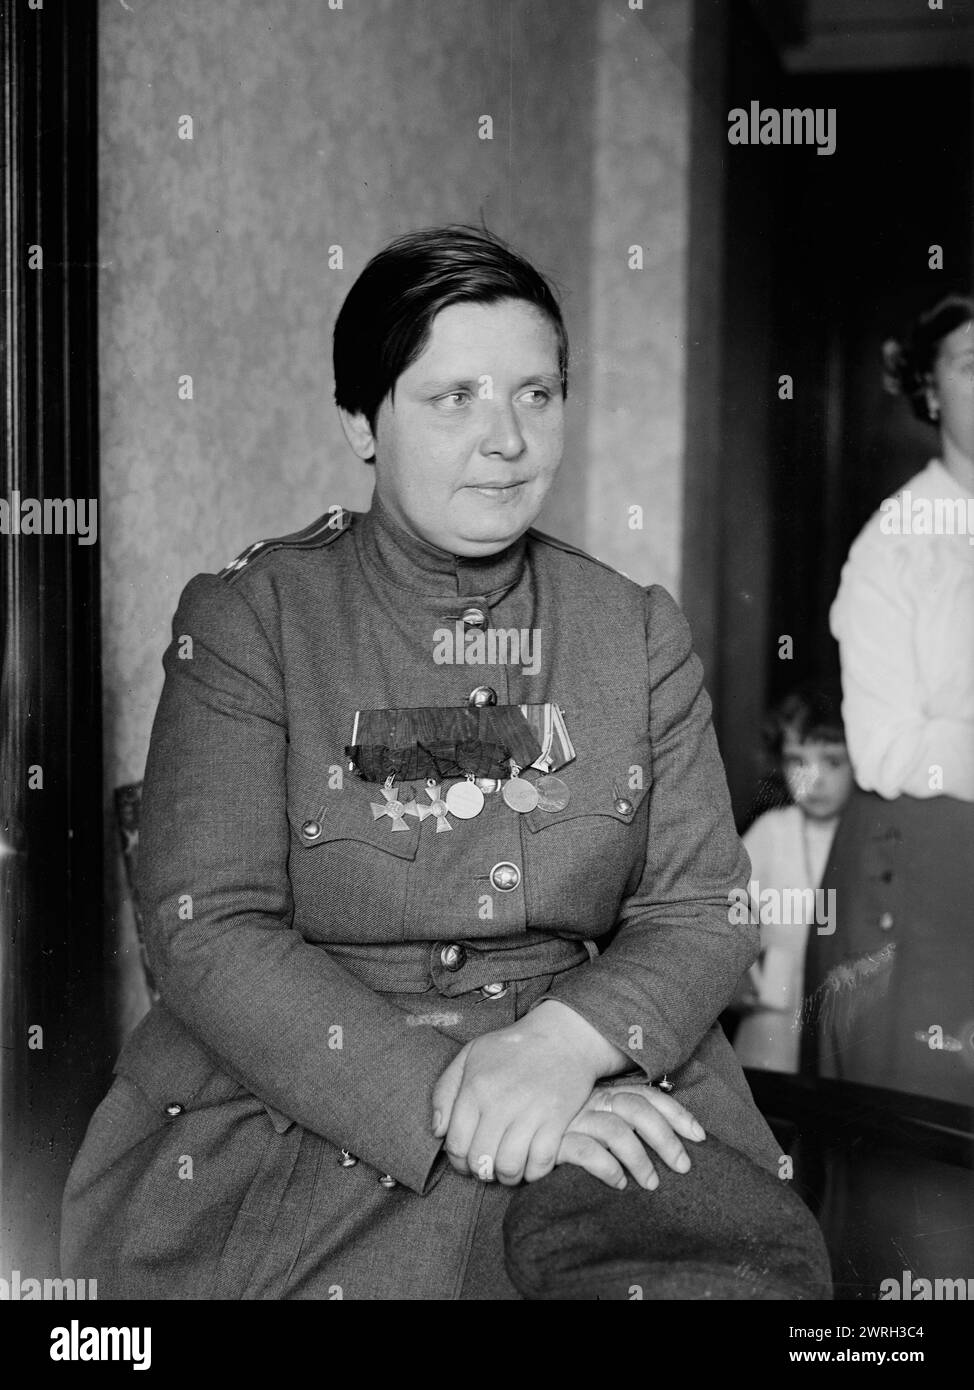 Com'd'r. Marie Bochkareva, 18 Feb 1918 (date created or published later). Maria Leontievna Bochkareva (1889-1920) a Russian woman who served in World War I and formed the Women's Battalion of Death. In 1918 she visited the United States including New York City. Stock Photo